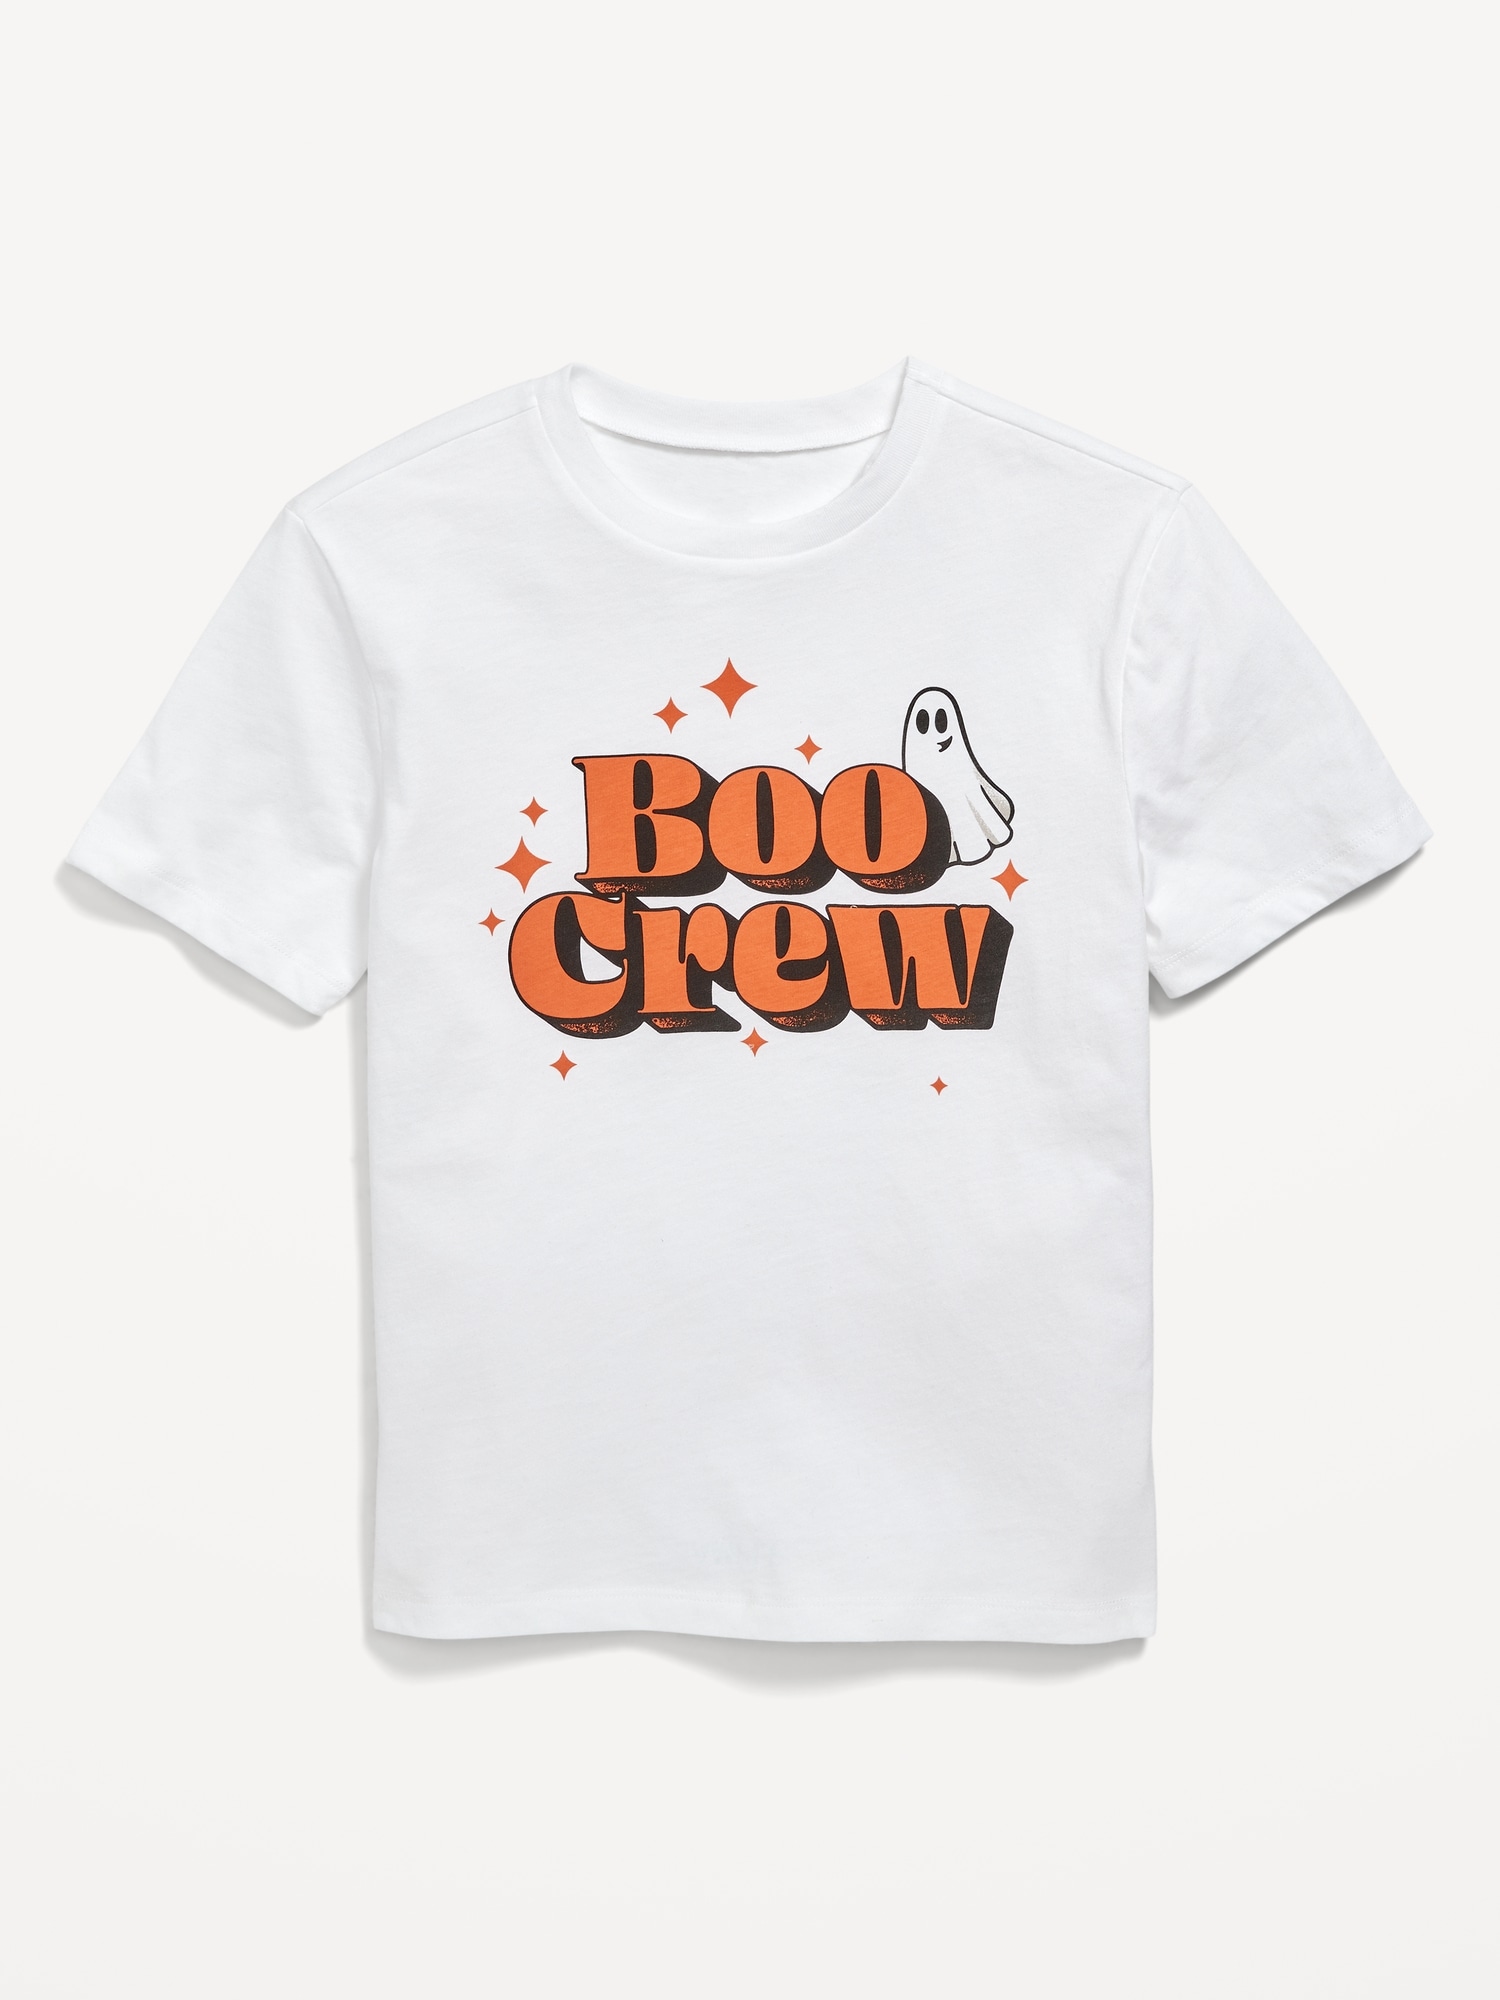 Matching Halloween Graphic T-Shirts for Boys | Old Navy